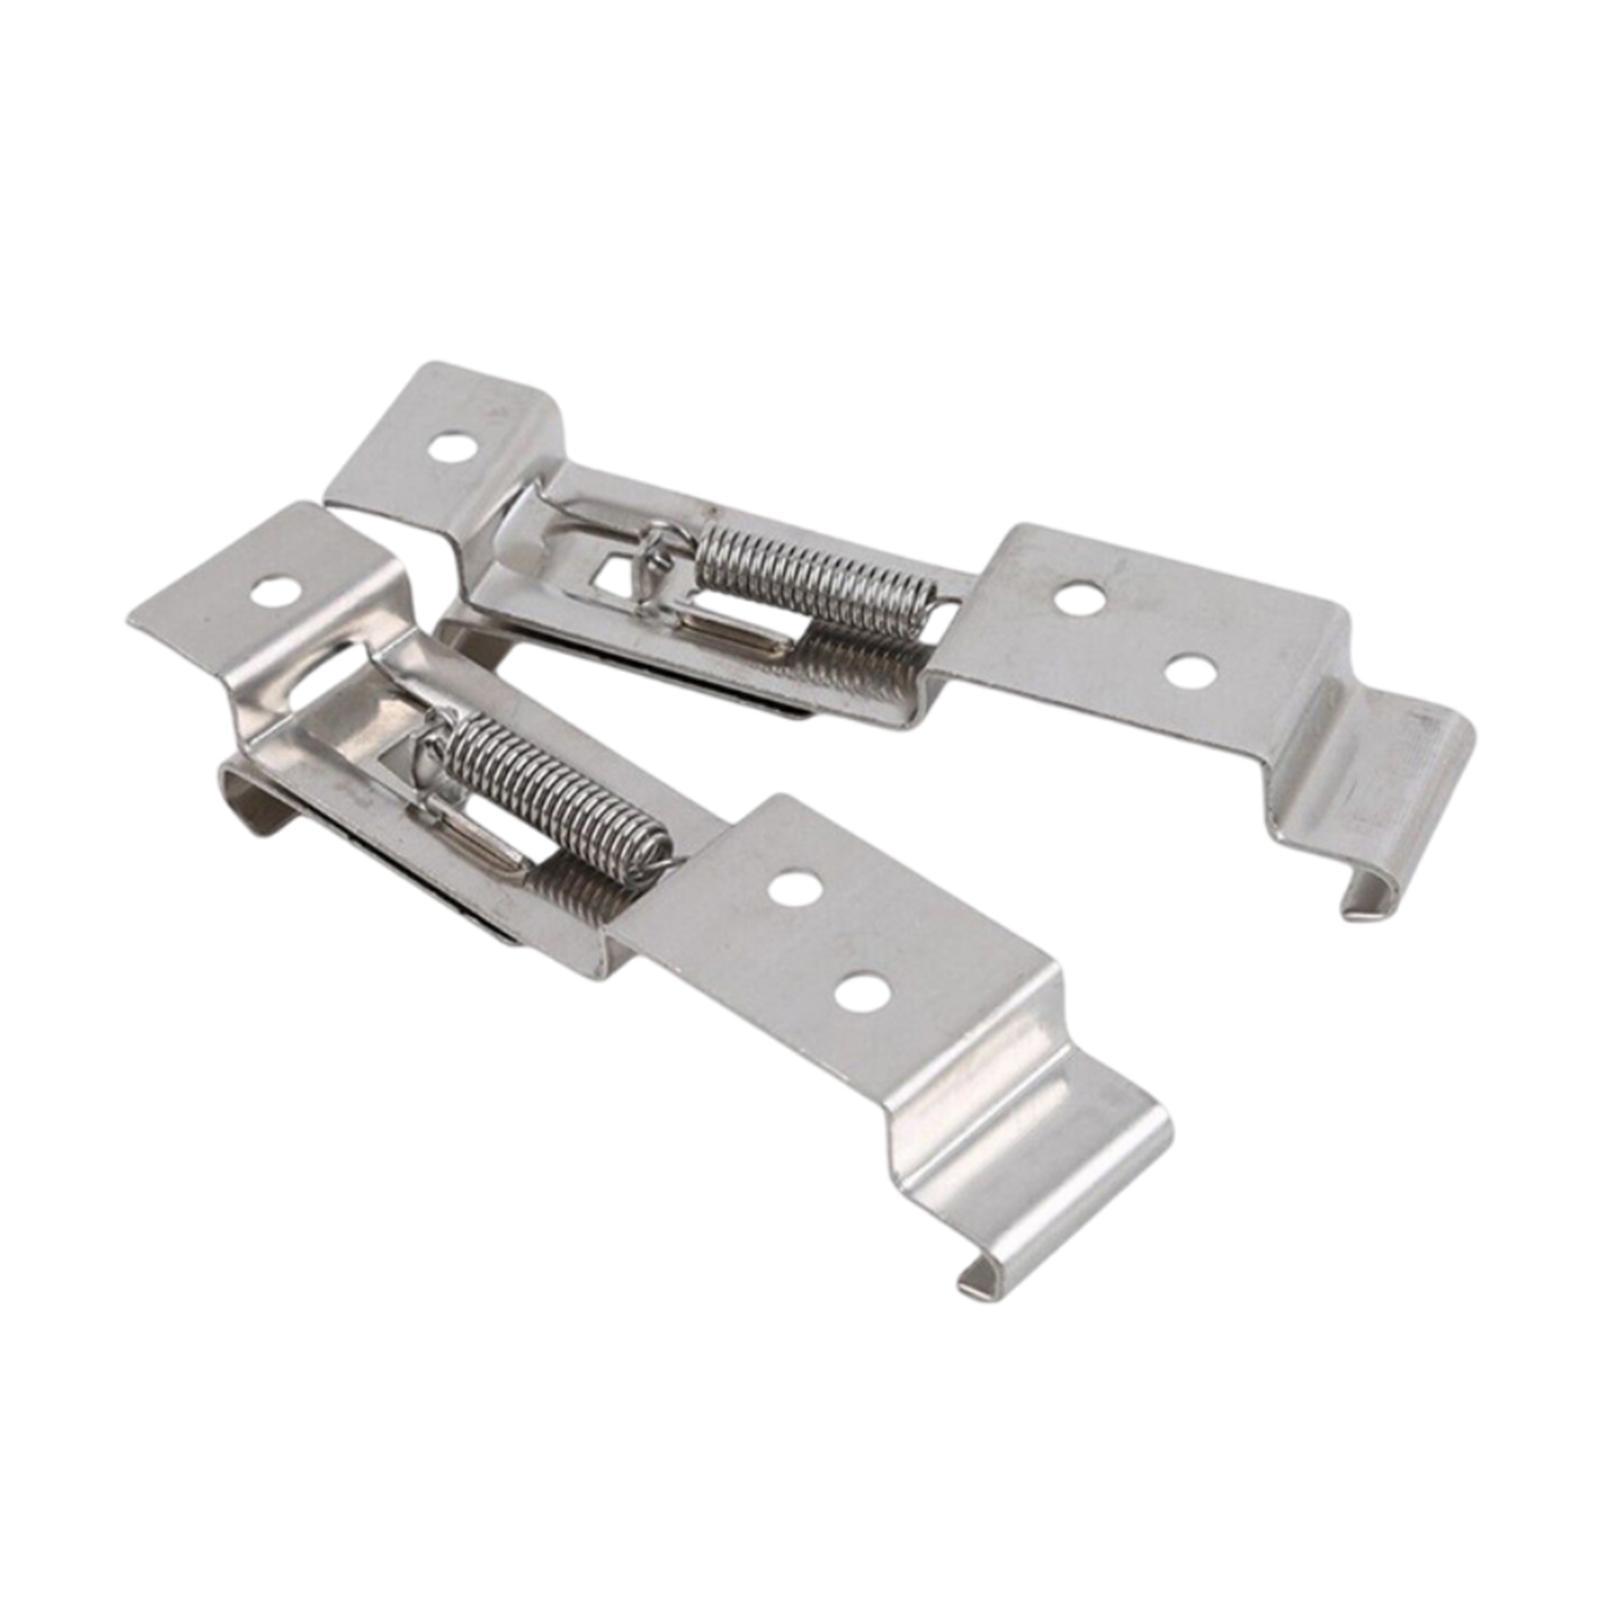 2x Cars  Plate Cover  Number Plate Clips for RV Quality